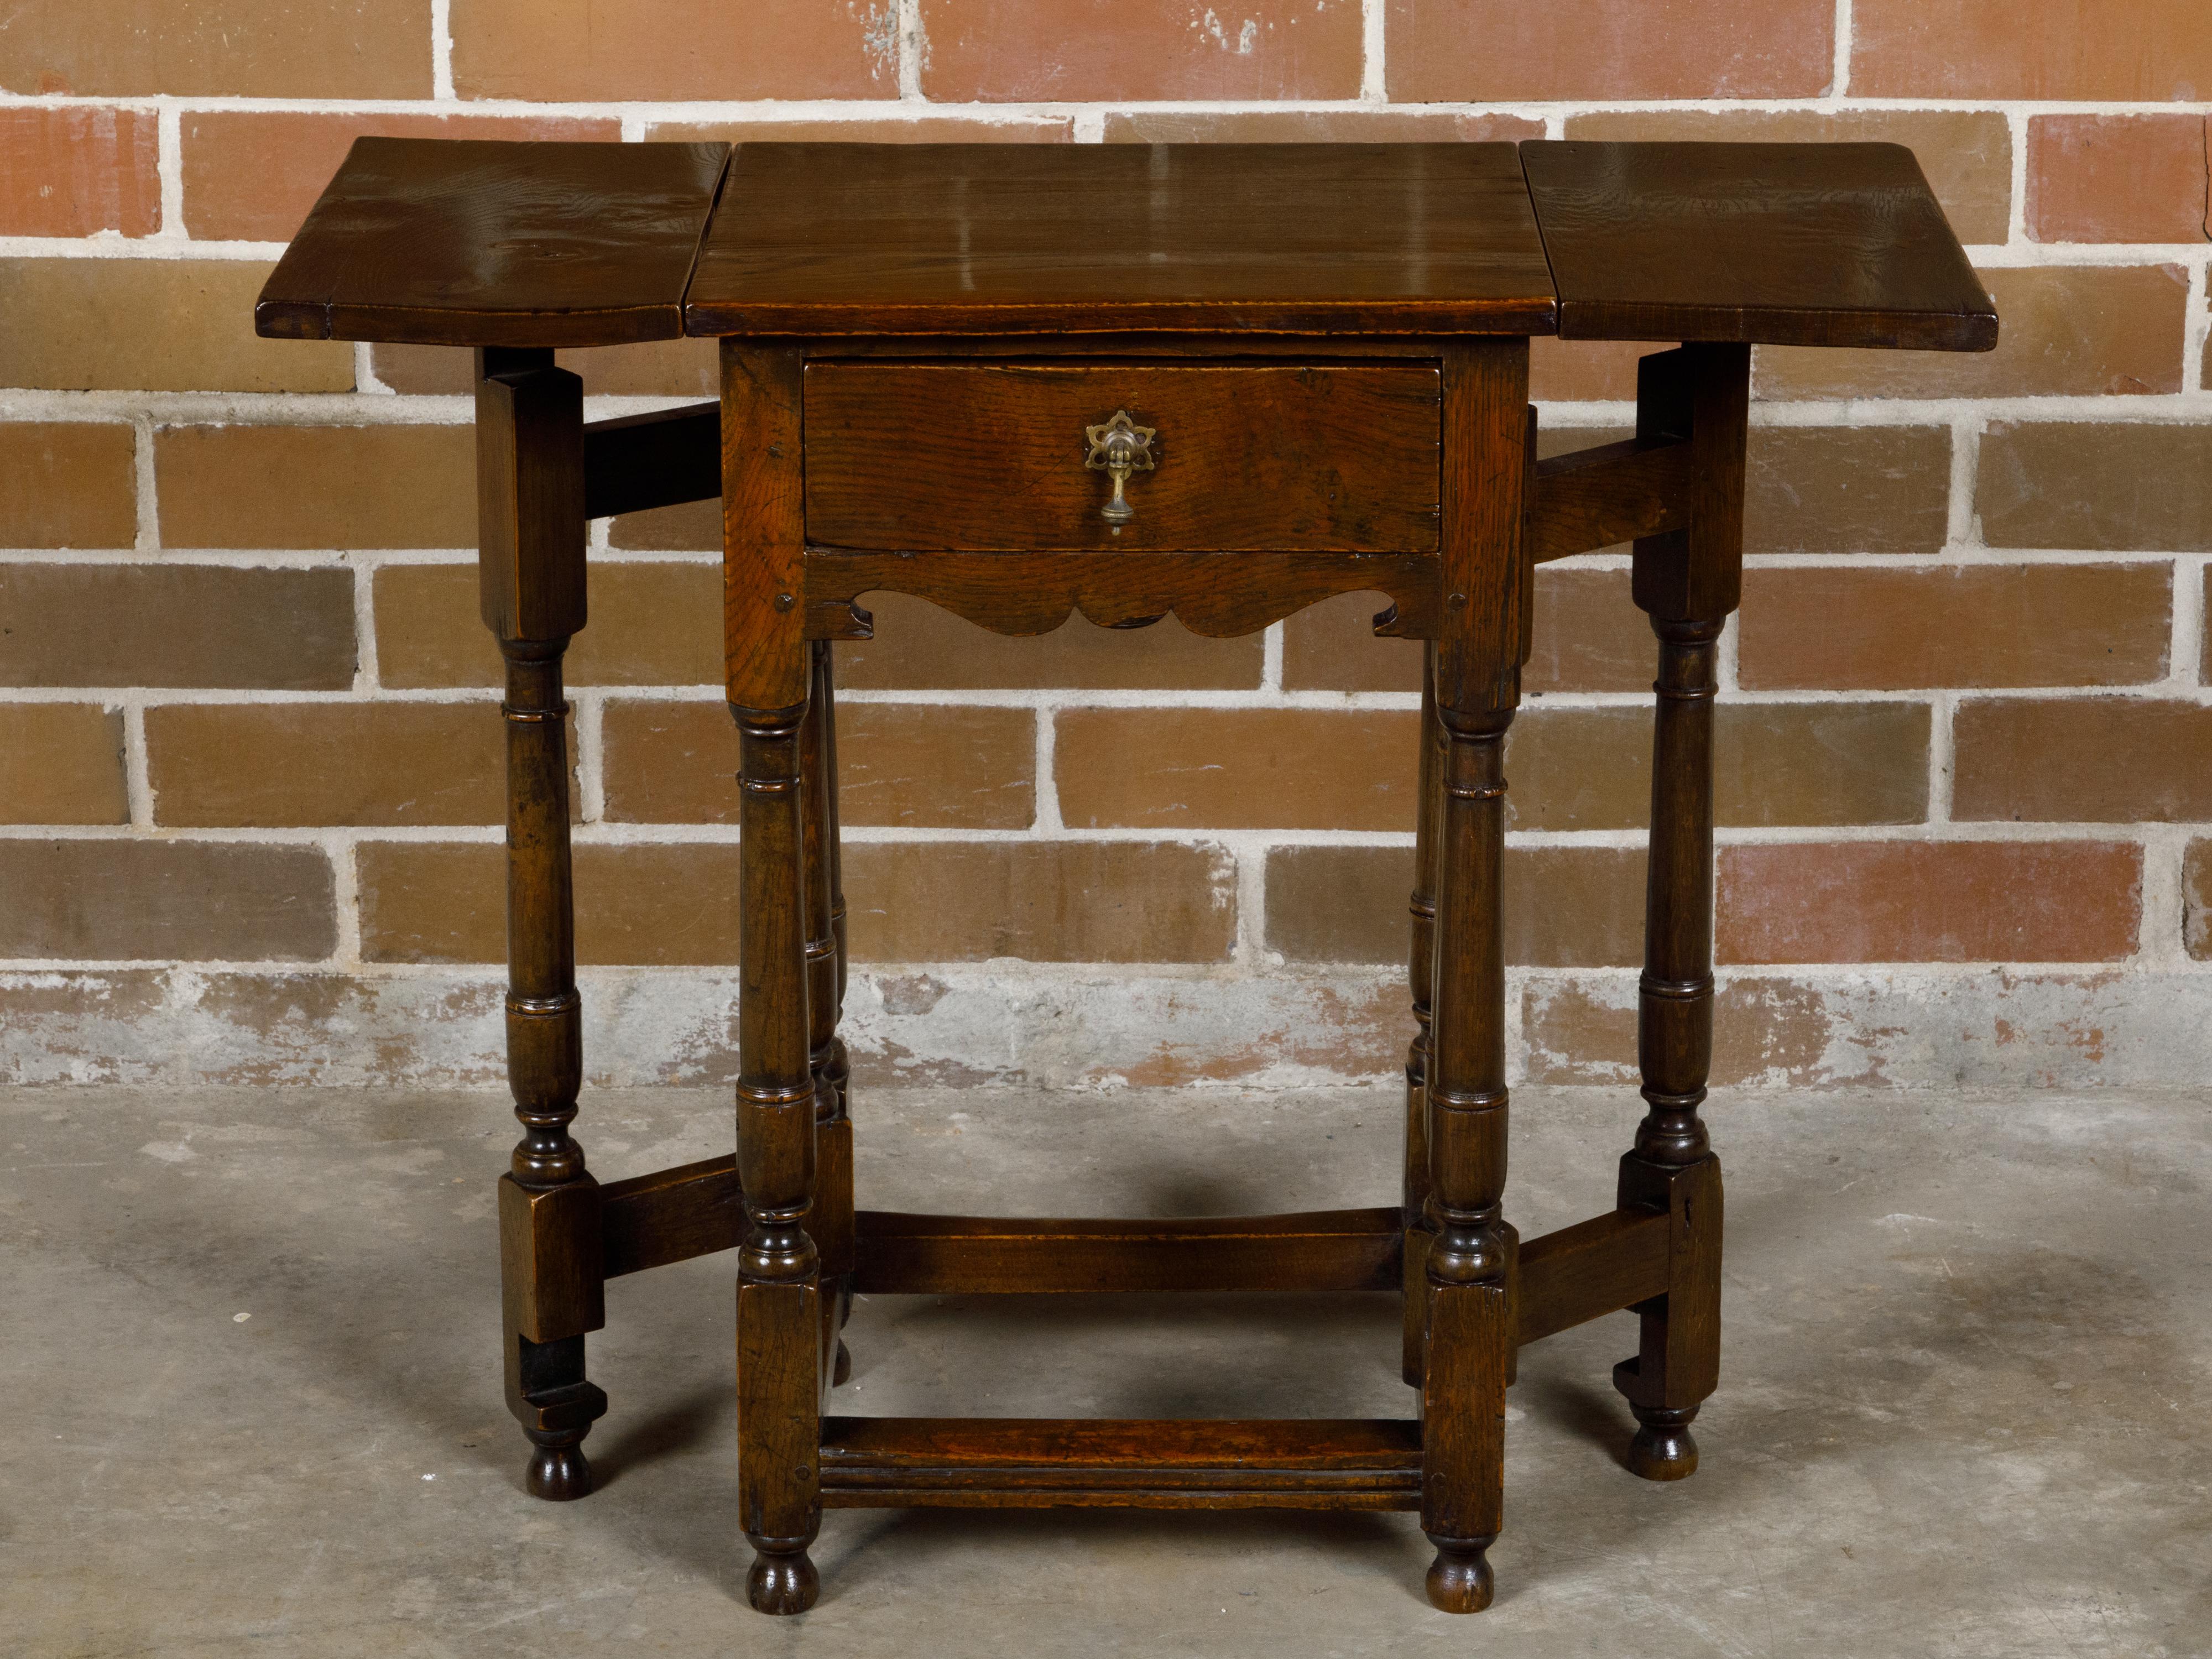 English 19th Century Oak Drop Leaf Table with Swivel Legs and Single Drawer For Sale 4